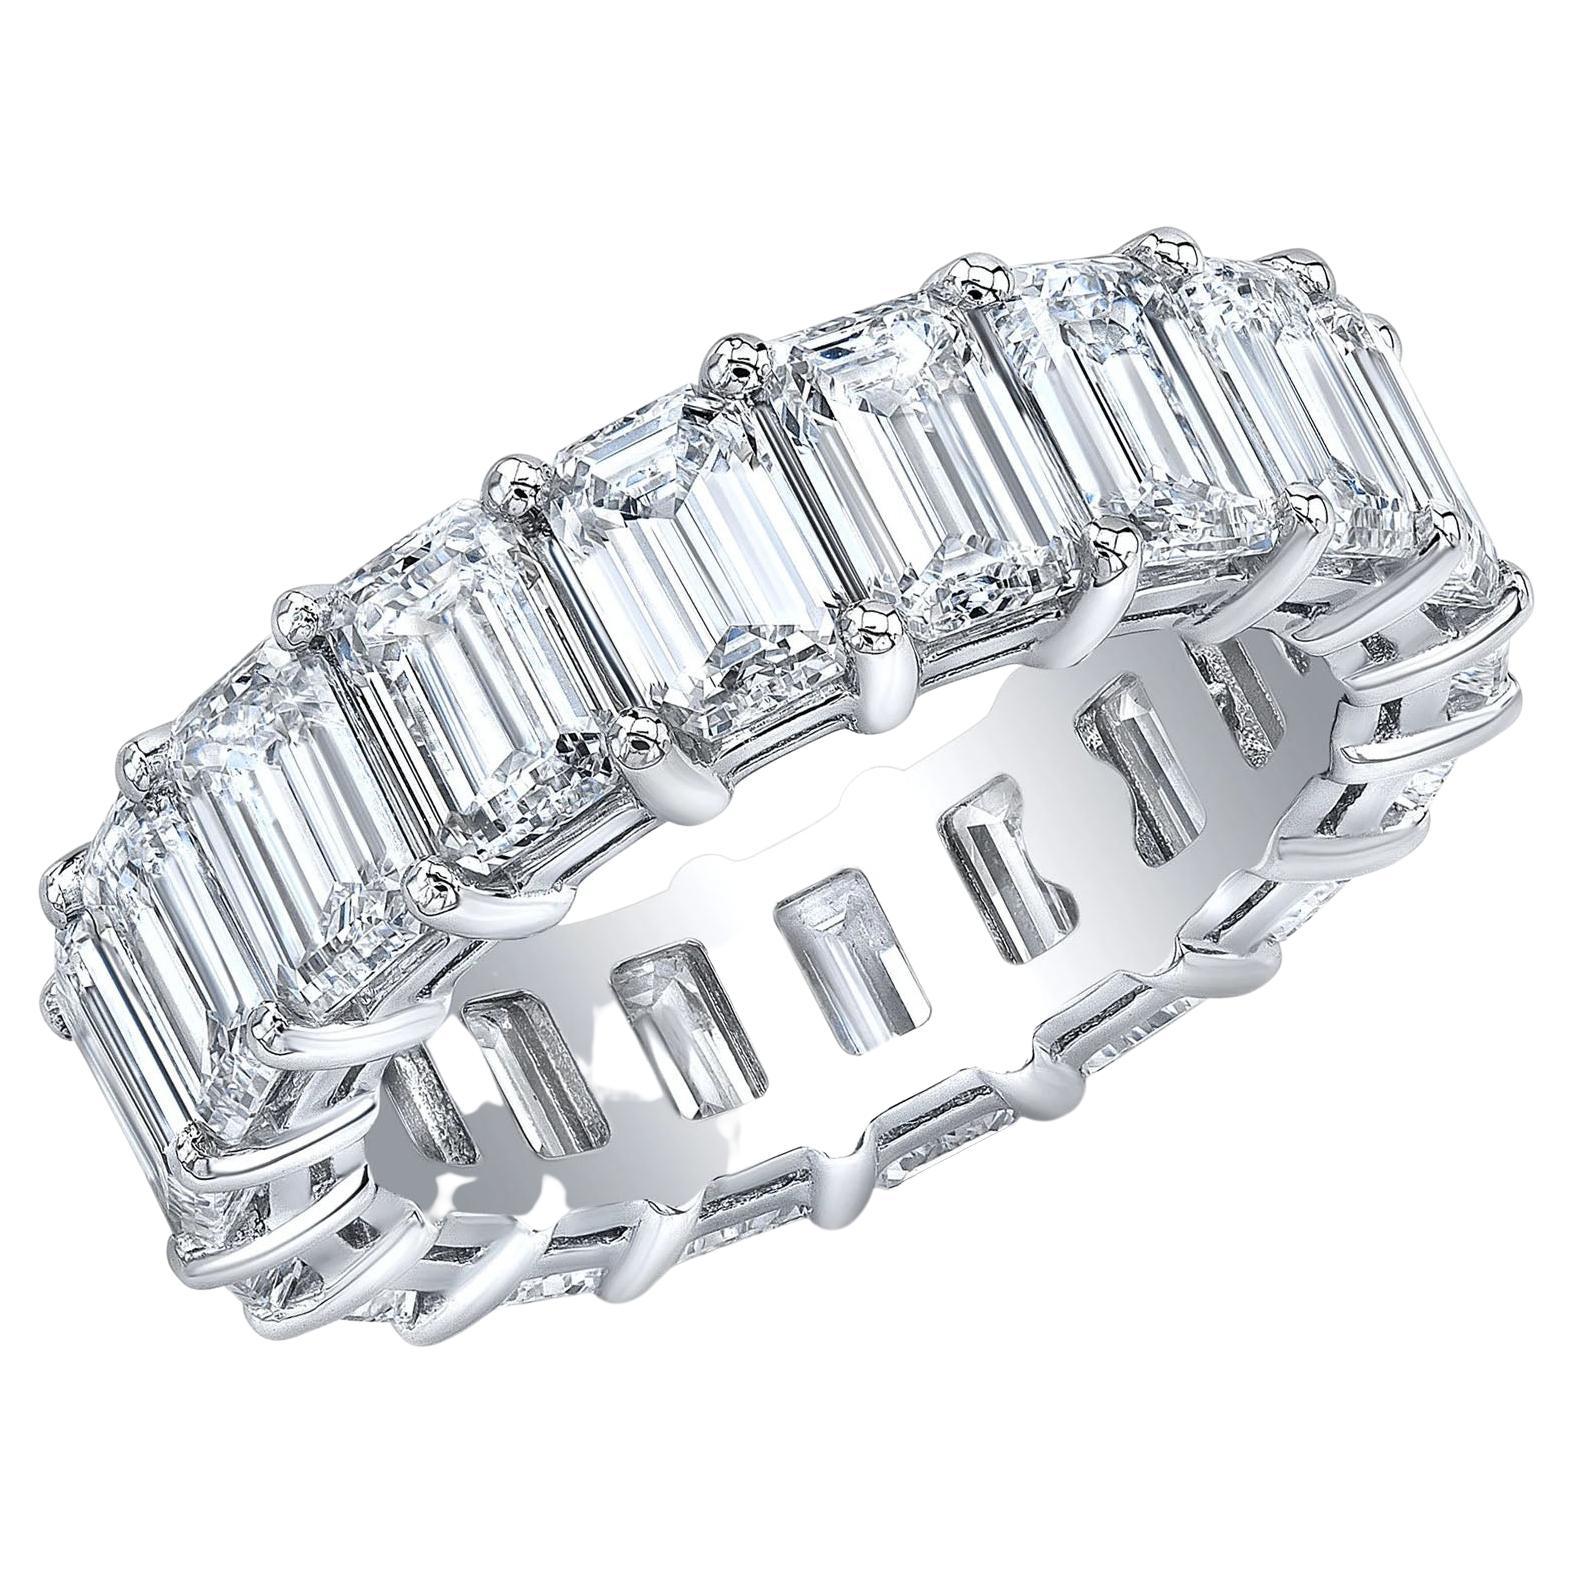 For Sale:  5.50 Carat Emerald Cut Eternity Ring Classic Gallery F-G Color VS1 Clarity 14k